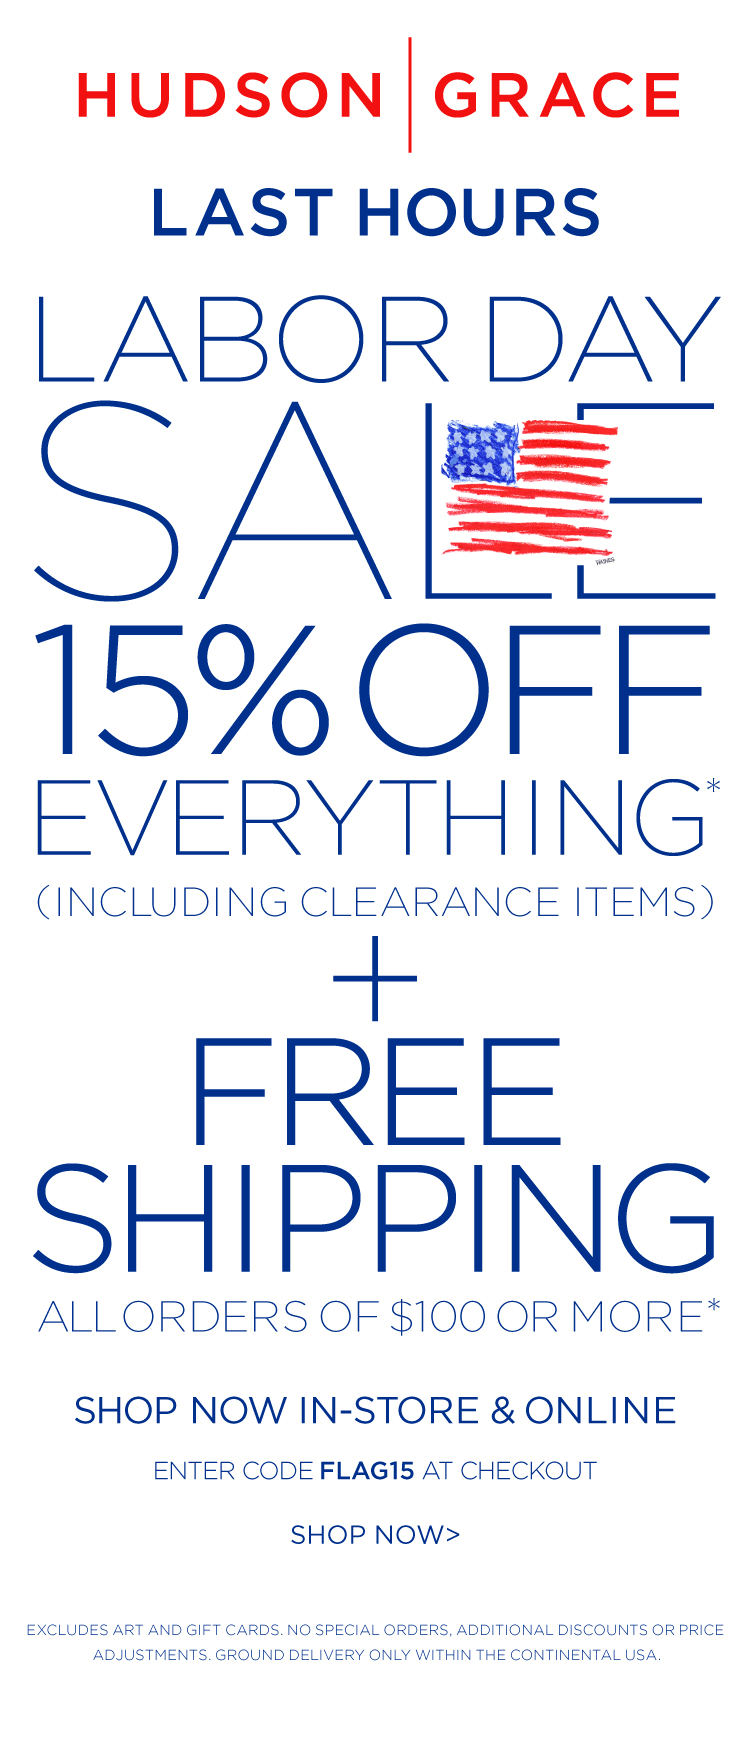 Hudson Grace Last hours Labor Day Sale 15% off everything including clearance items + free shipping all orders of $100 or more. Shop now